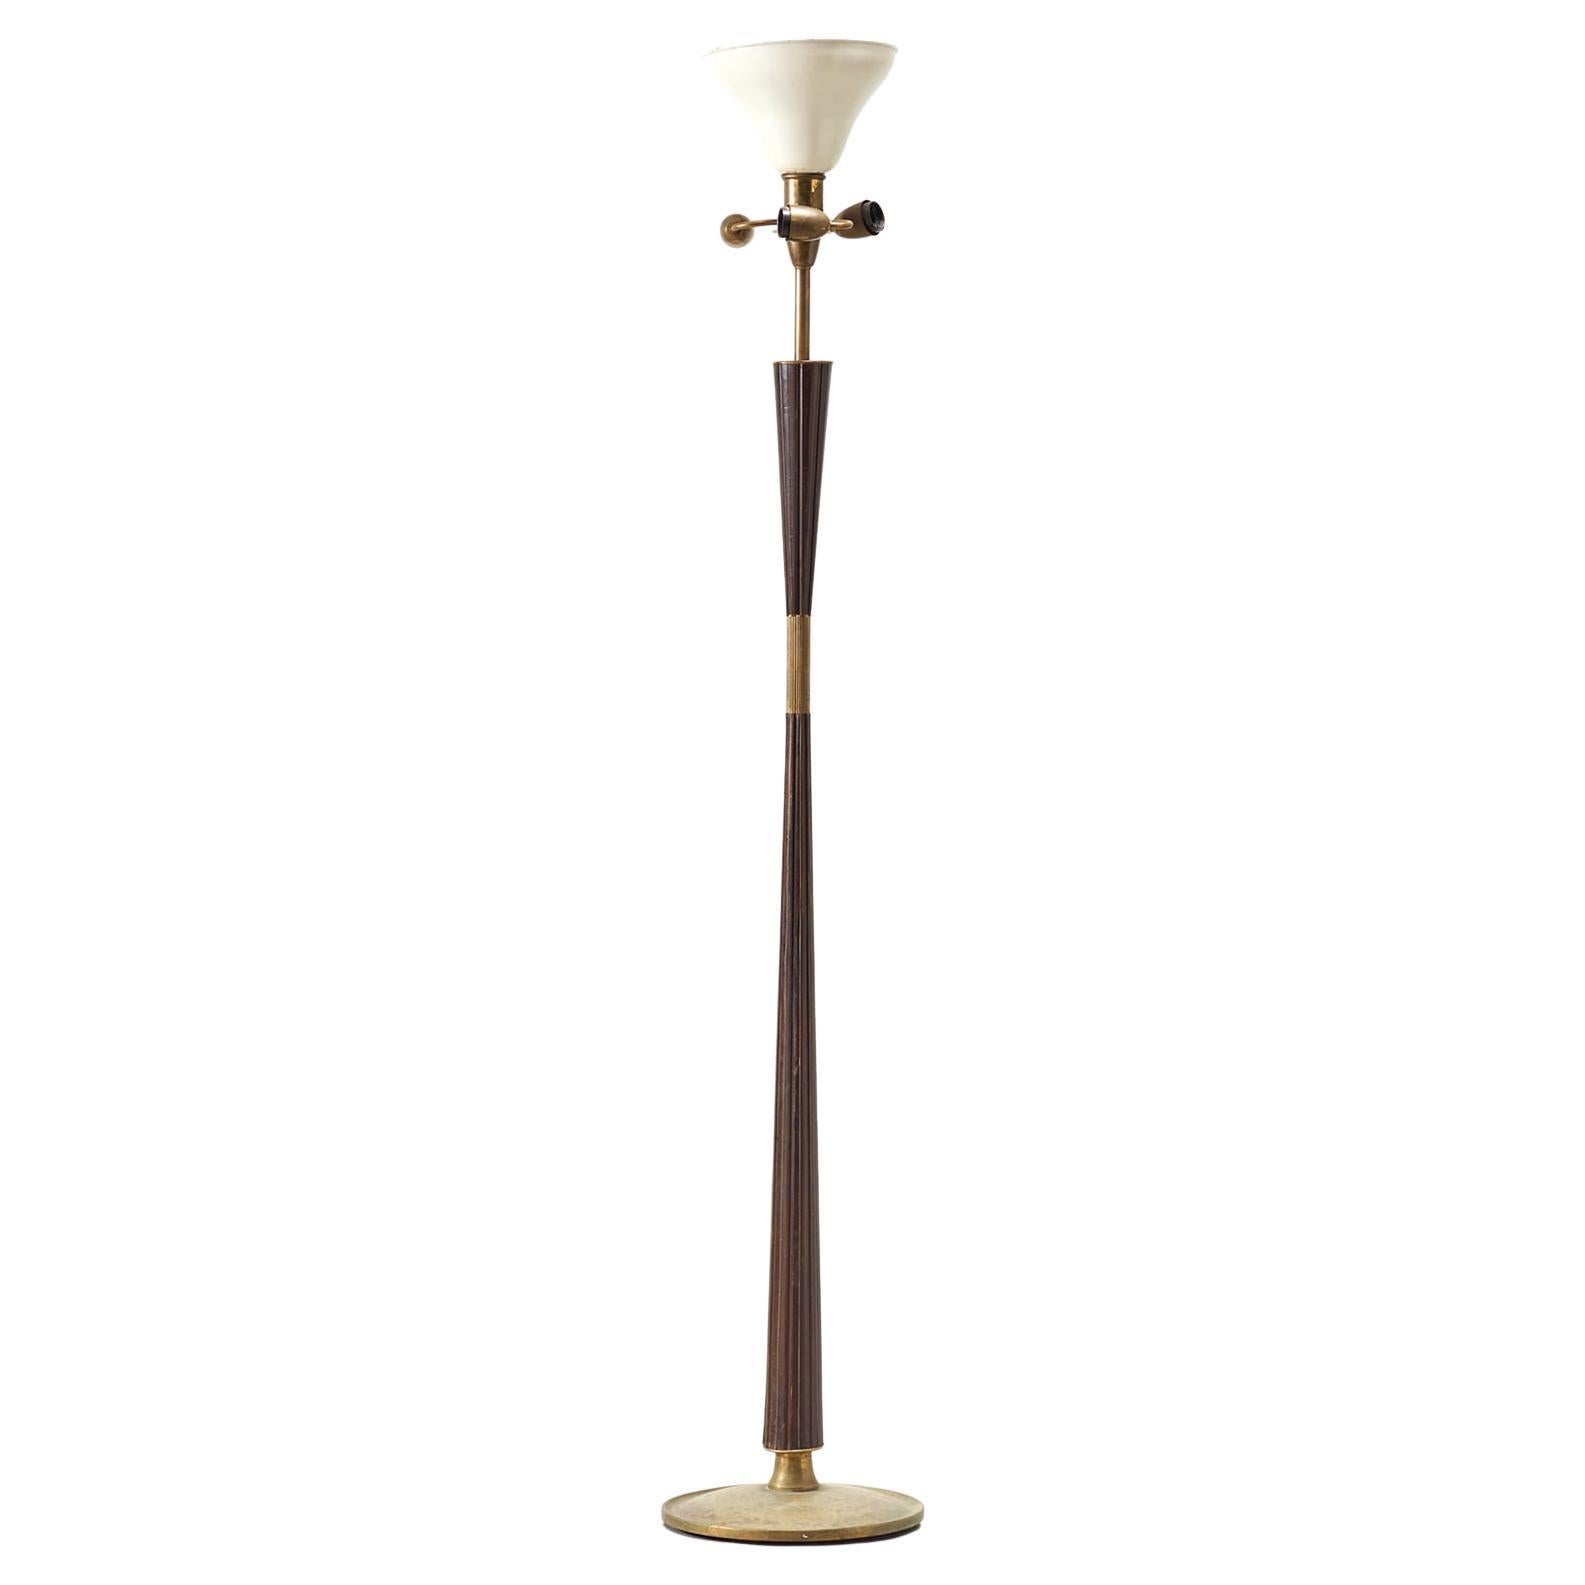 Mid-century Italian floor lamp in brass, by Stilnovo, circa 1950s. 

Brass, reeded mahogany stained beech wood.

Dimensions: H180 x D32 cm.